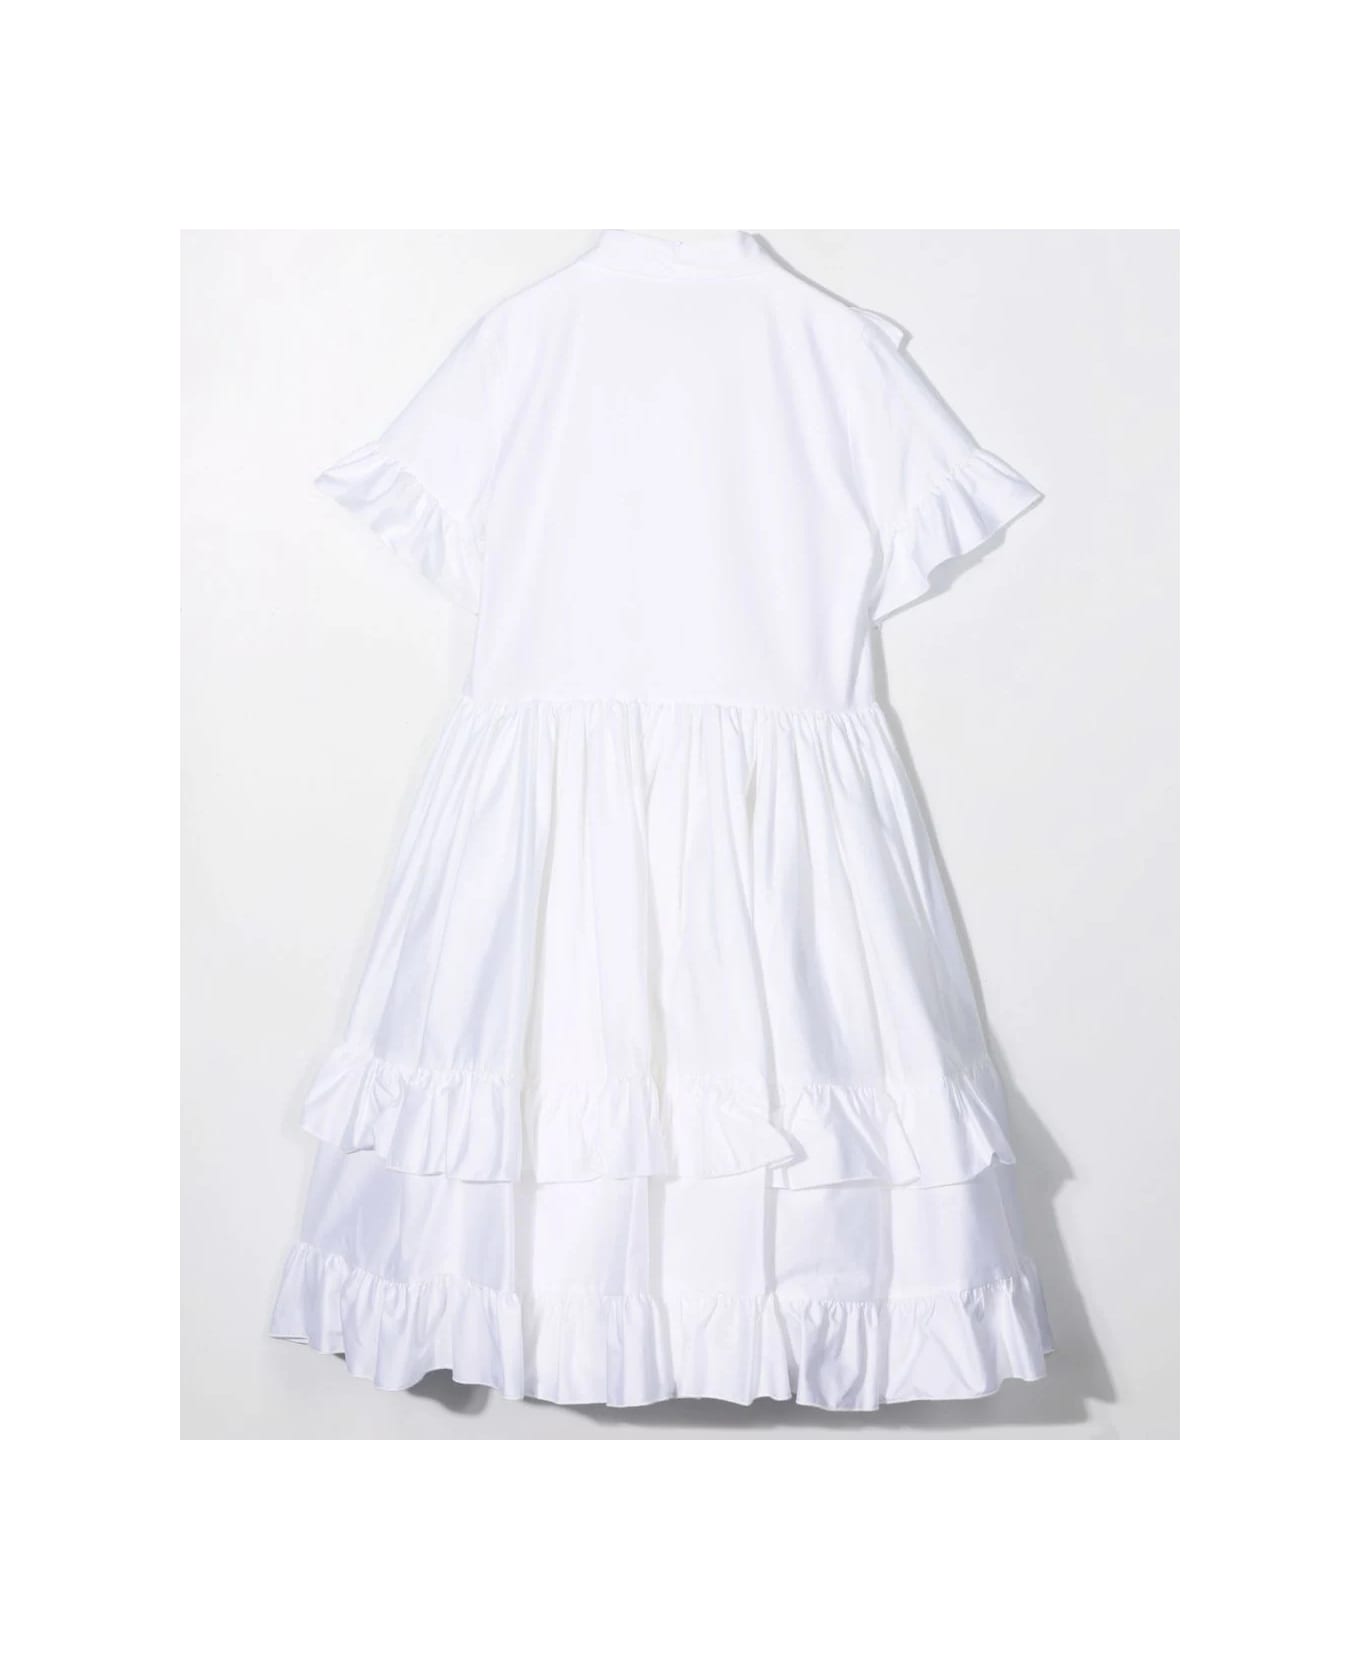 Elie Saab Chemisier With Ruffles - White